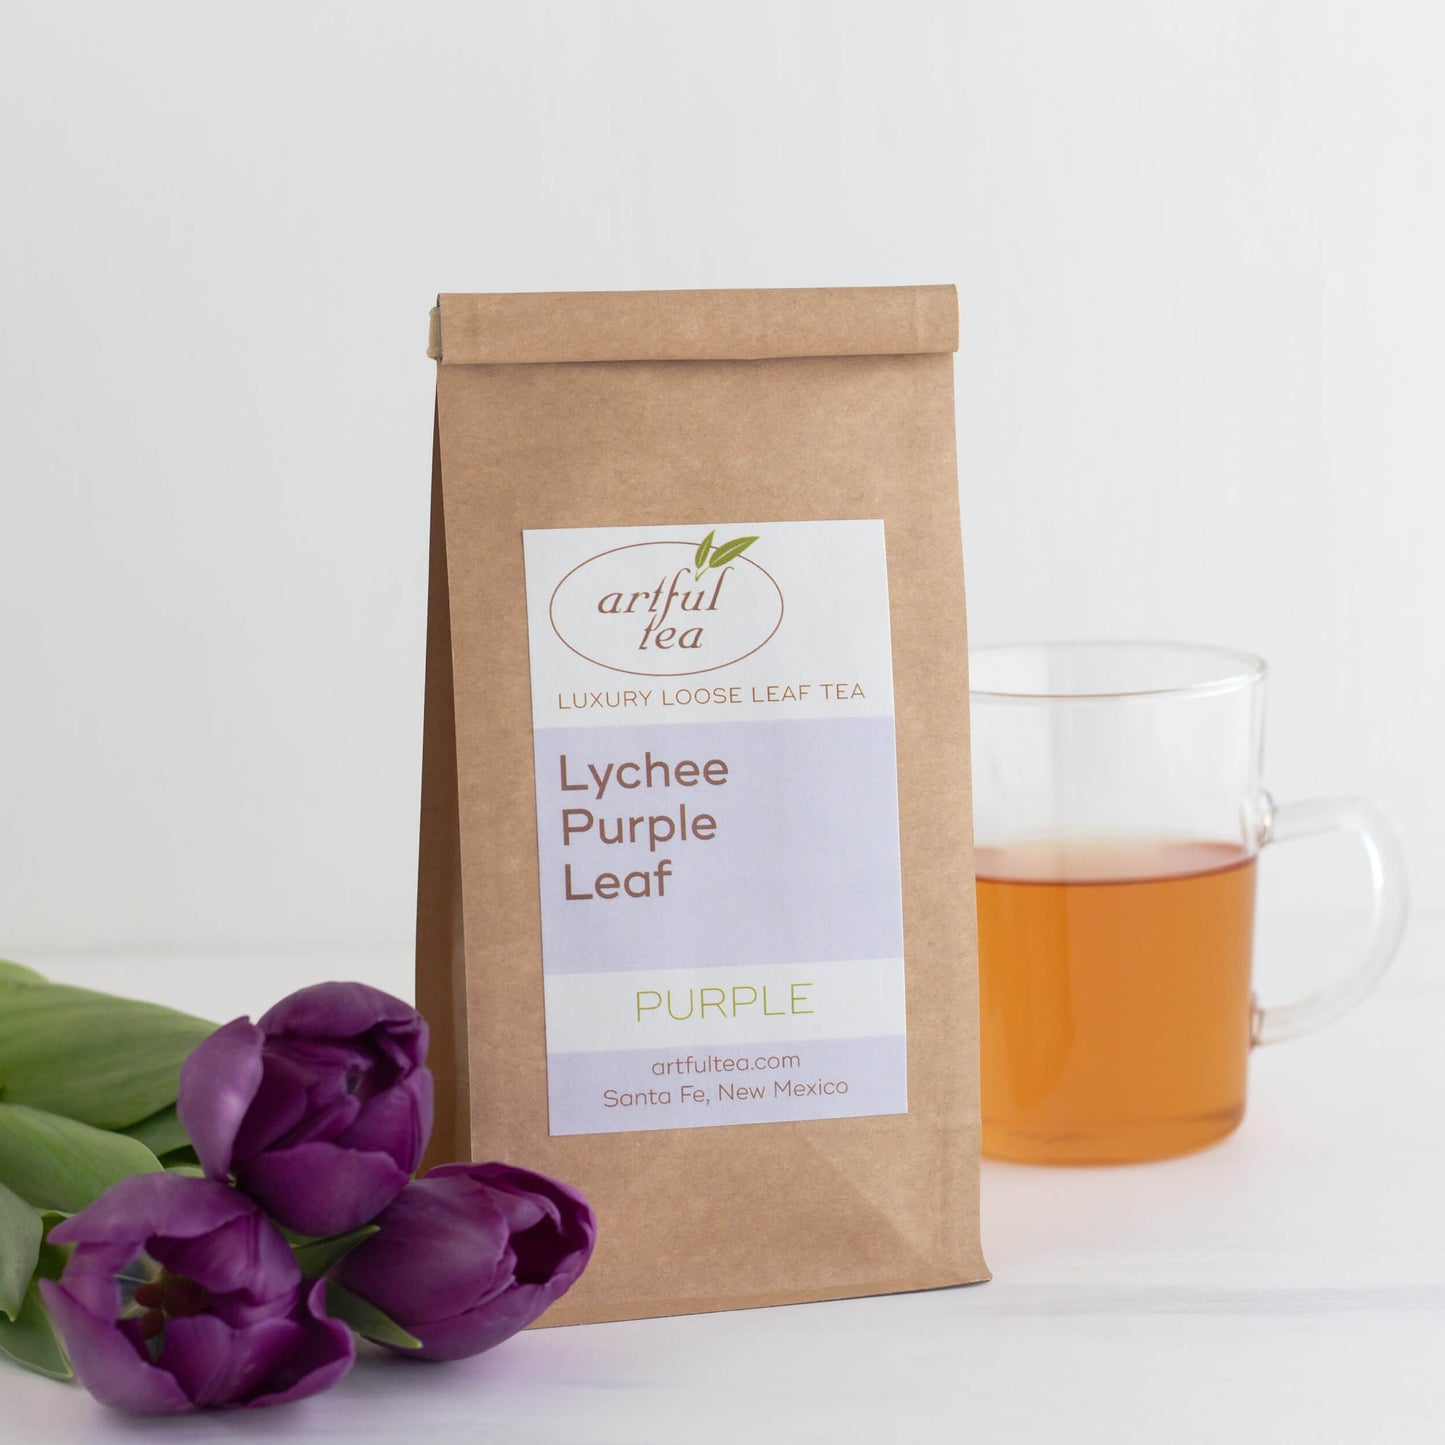 Lychee Purple Leaf tea shown packaged in a kraft bag, with three purple tulips on the left and a glass mug of brewed tea on the right